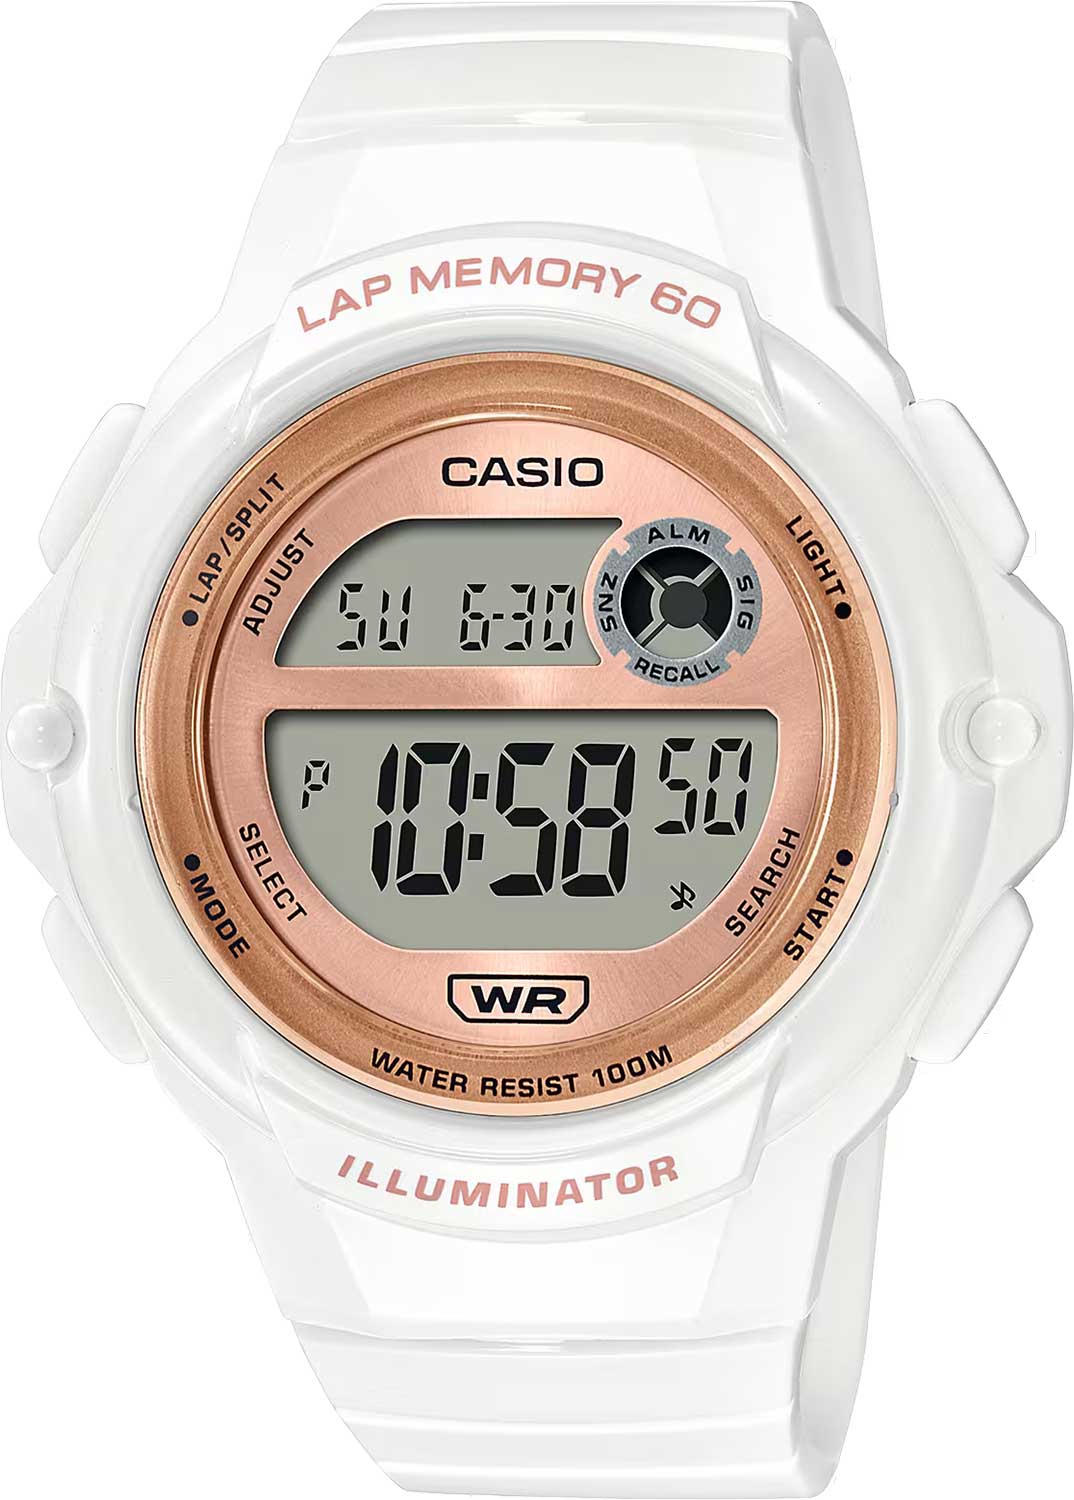    Casio Collection LWS-1200H-7A2  